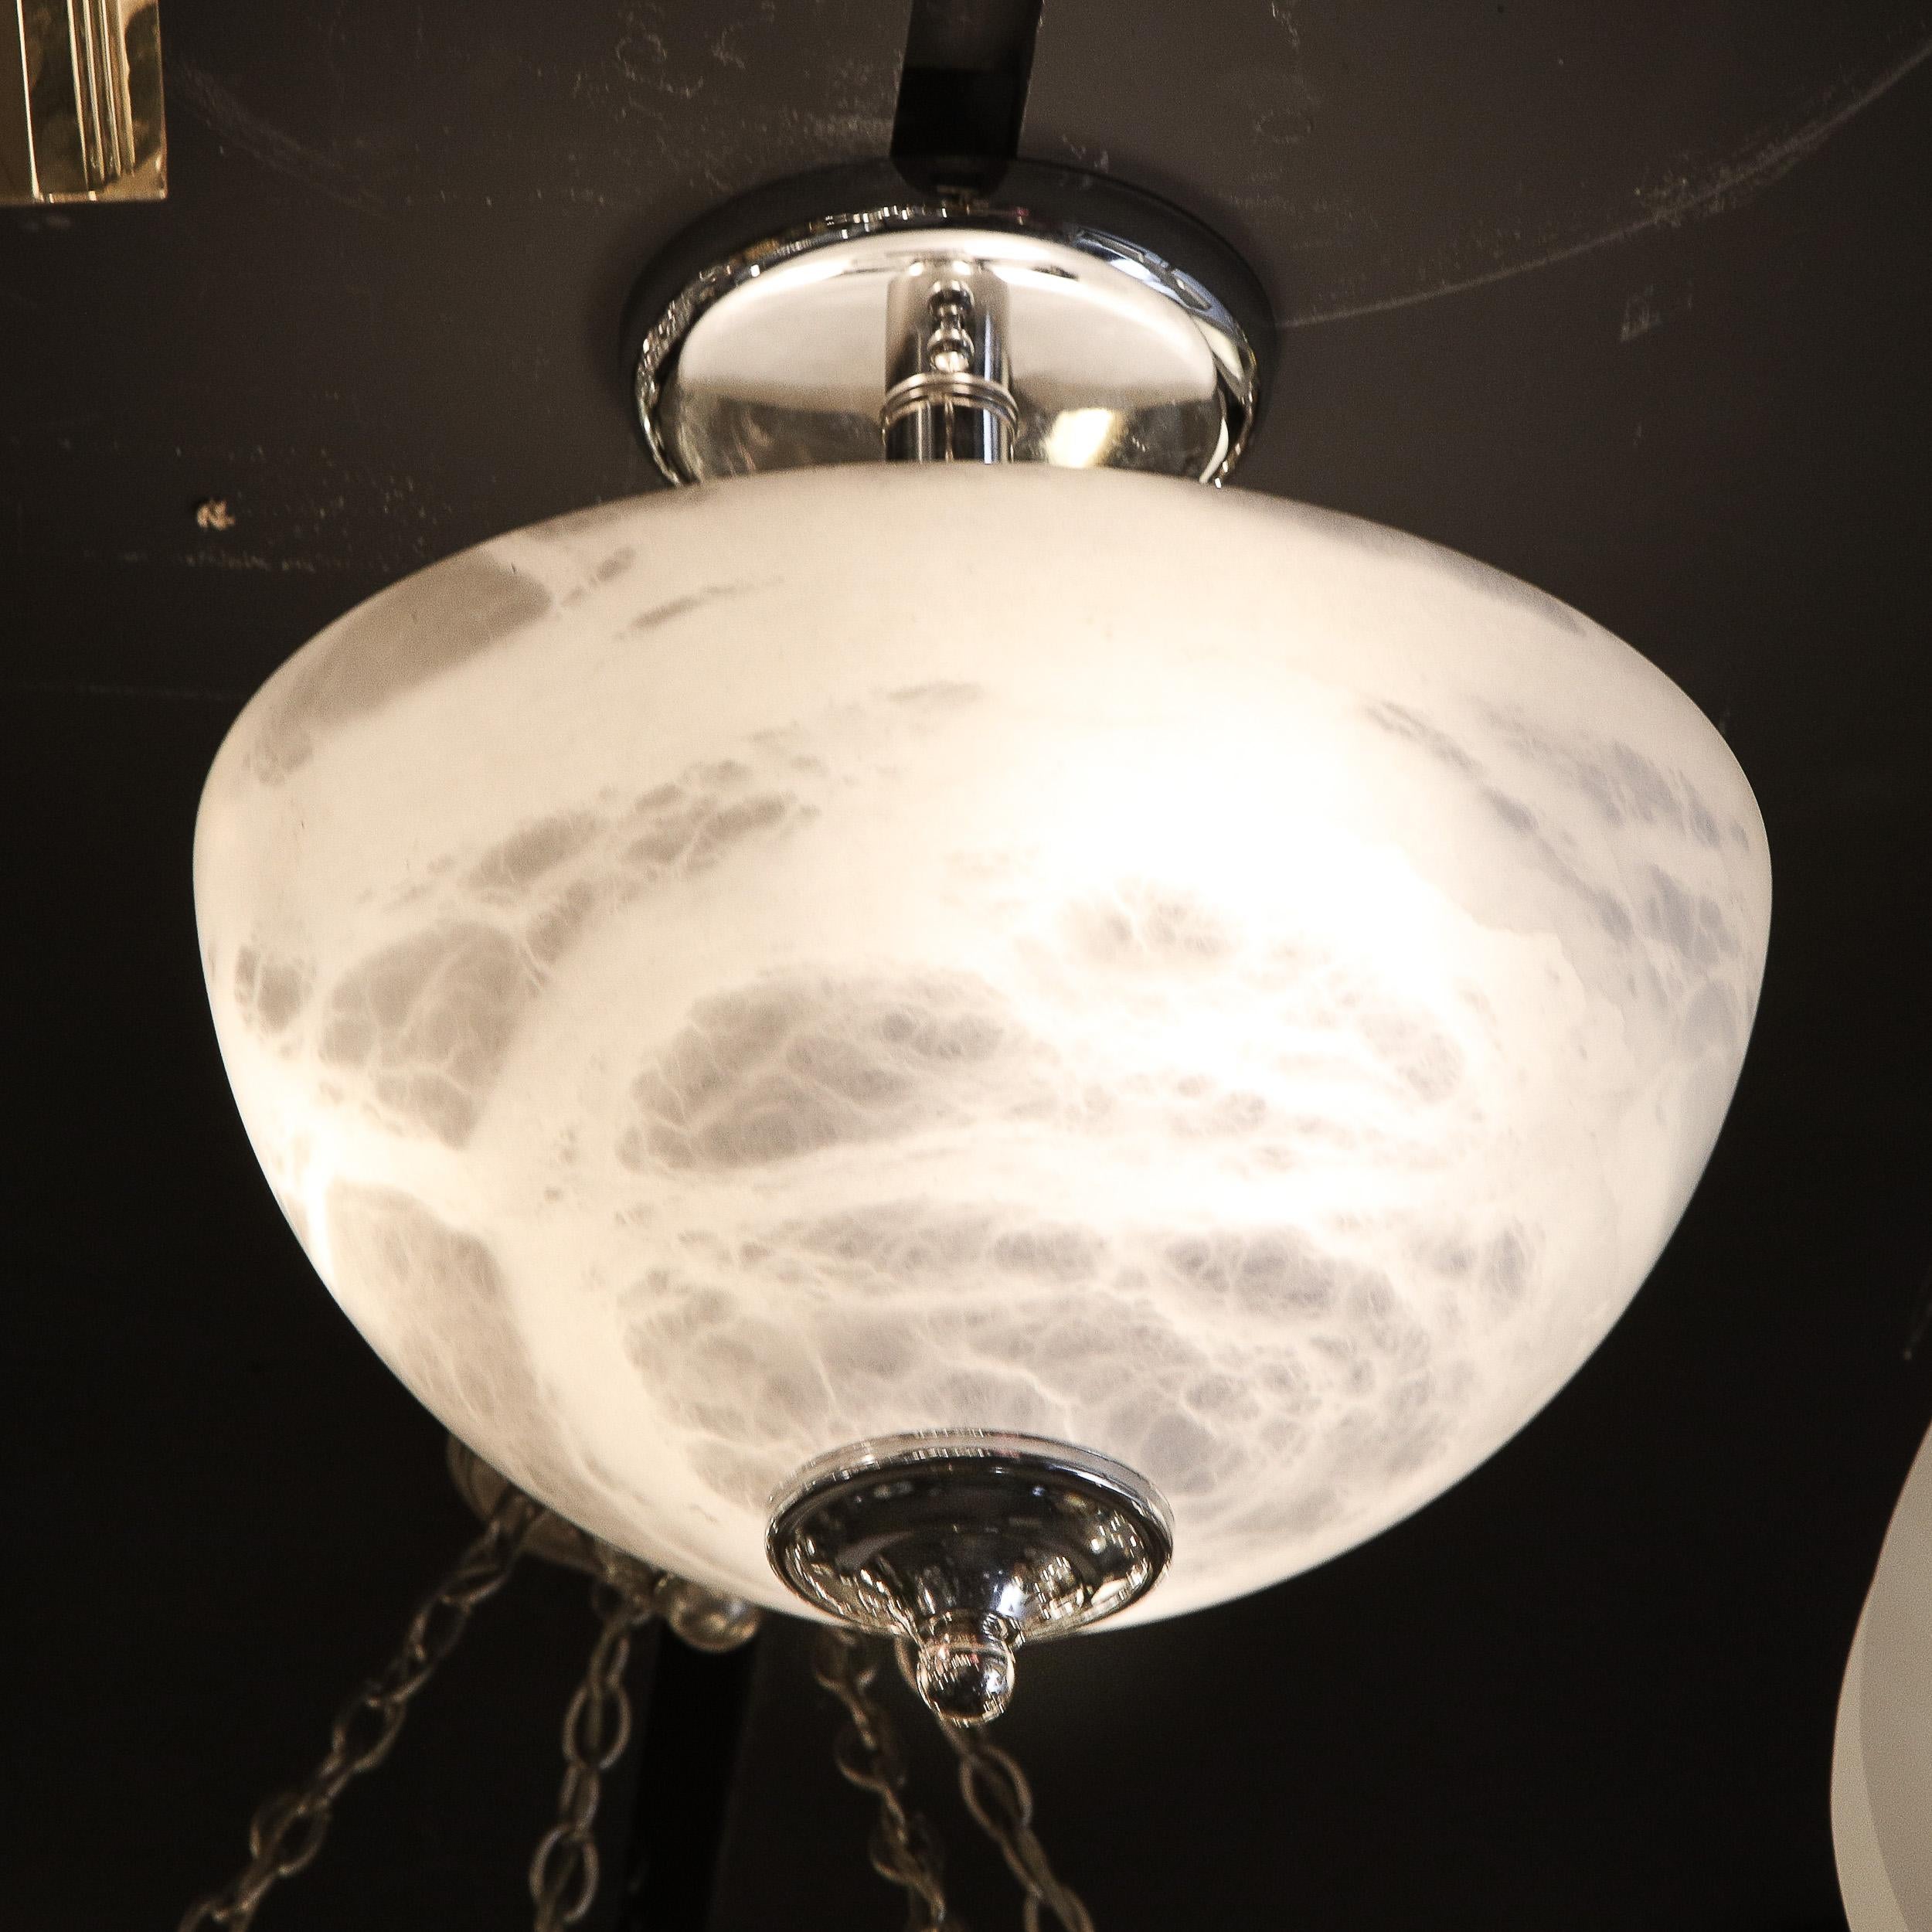 This elegant modernist alabaster and chrome flush mount chandelier was realized in France during the latter half of the 20th Century. It features a domed bullet form shade in sumptuous white alabaster displaying a particularly dramatic and high